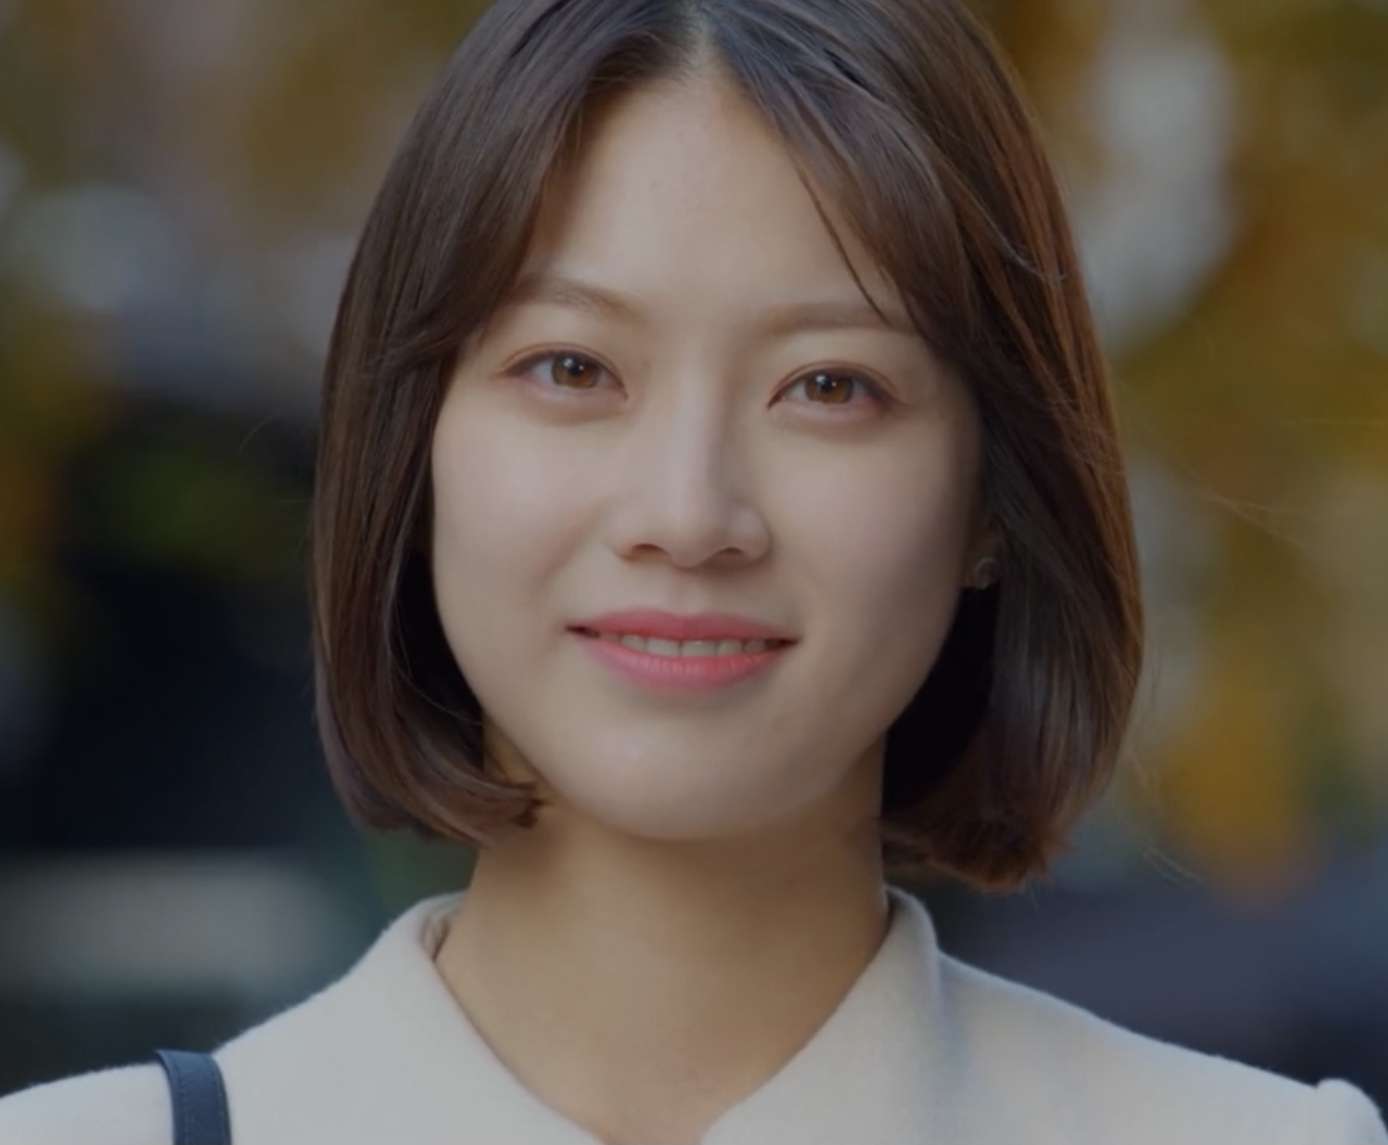 Kong Seung-yeon Biography: Age, Net Worth, Partner, Siblings, Movies and TV Shows, Wikipedia